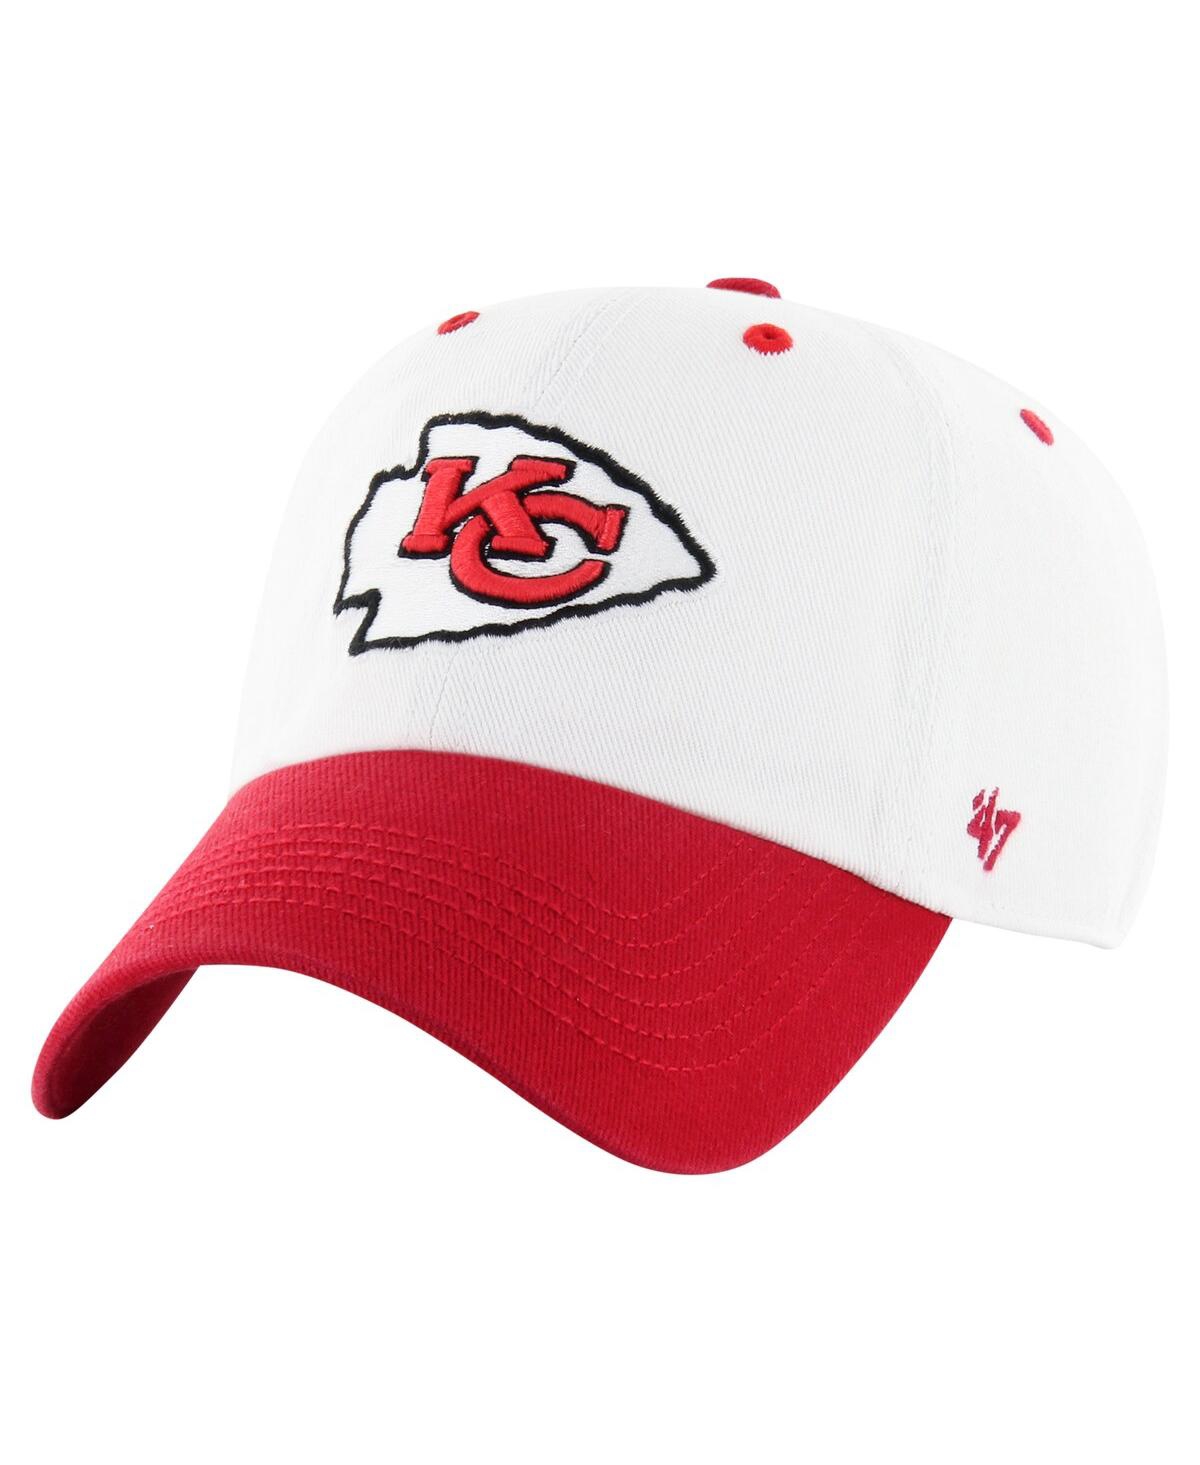 47 Men's White/Red Kansas City Chiefs Double Header Diamond Clean Up Adjustable Hat - White Red